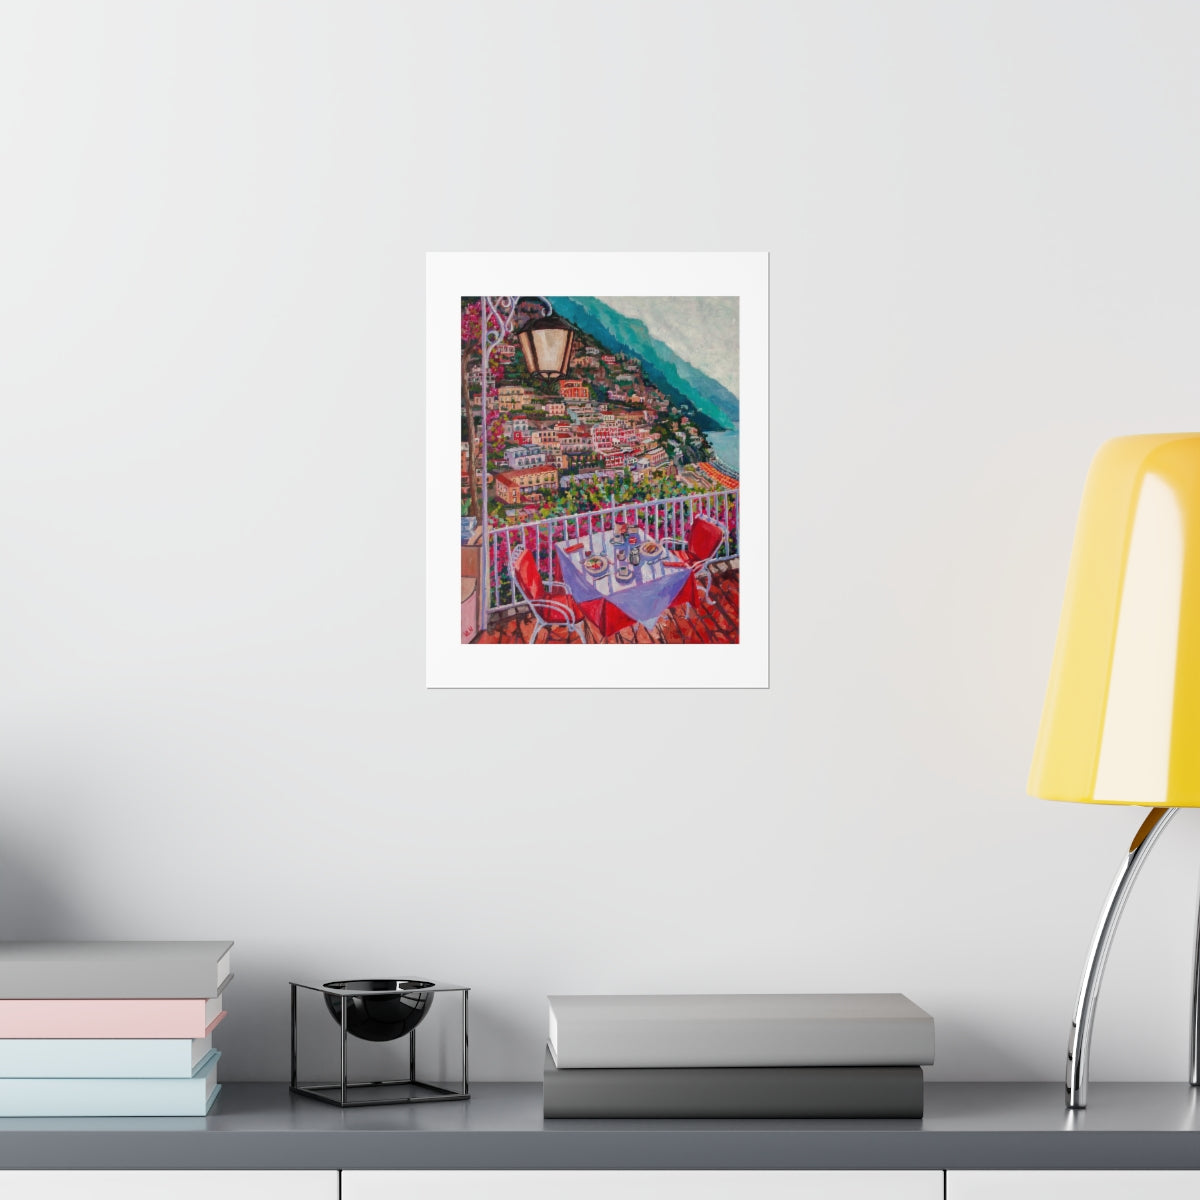 * Things Hoped For, Positano, Italy- Premium Matte Vertical Poster